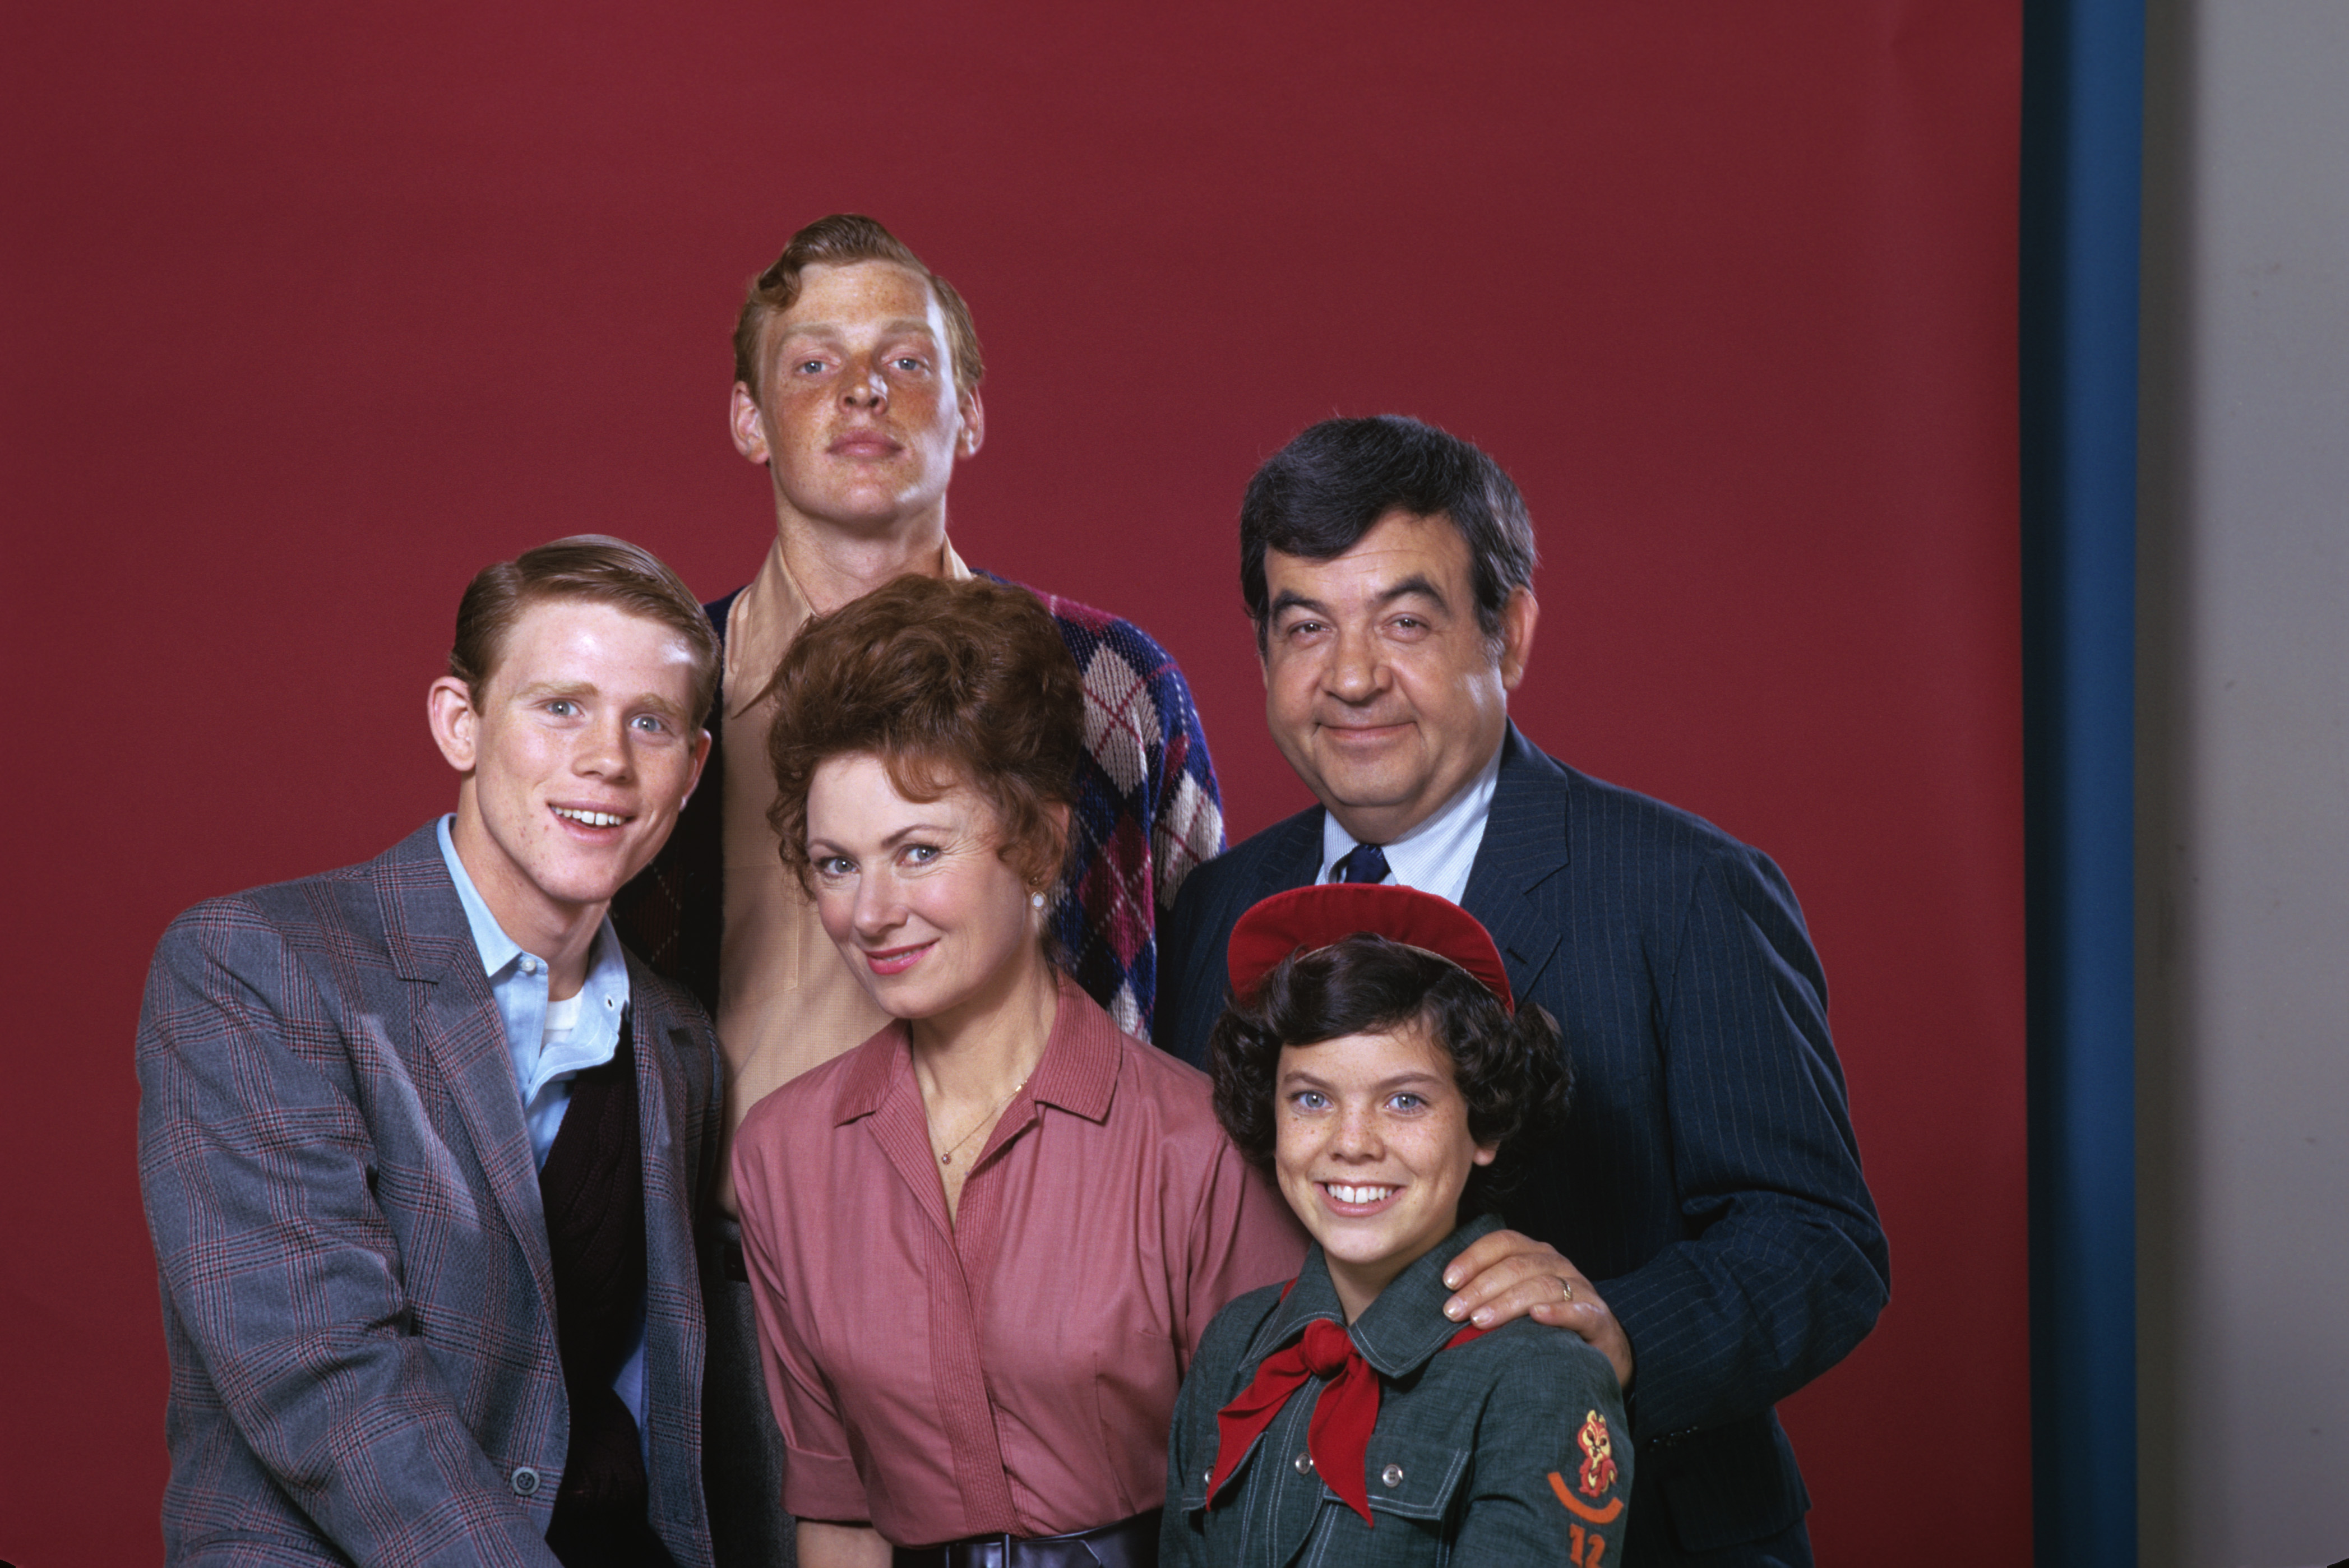 Ron Howard, Marion Ross, Tom Bosley, Erin Moran, and Gavan O'Herlihy on the set of "Happy Days" on January7, 1974 | Source: Getty Images